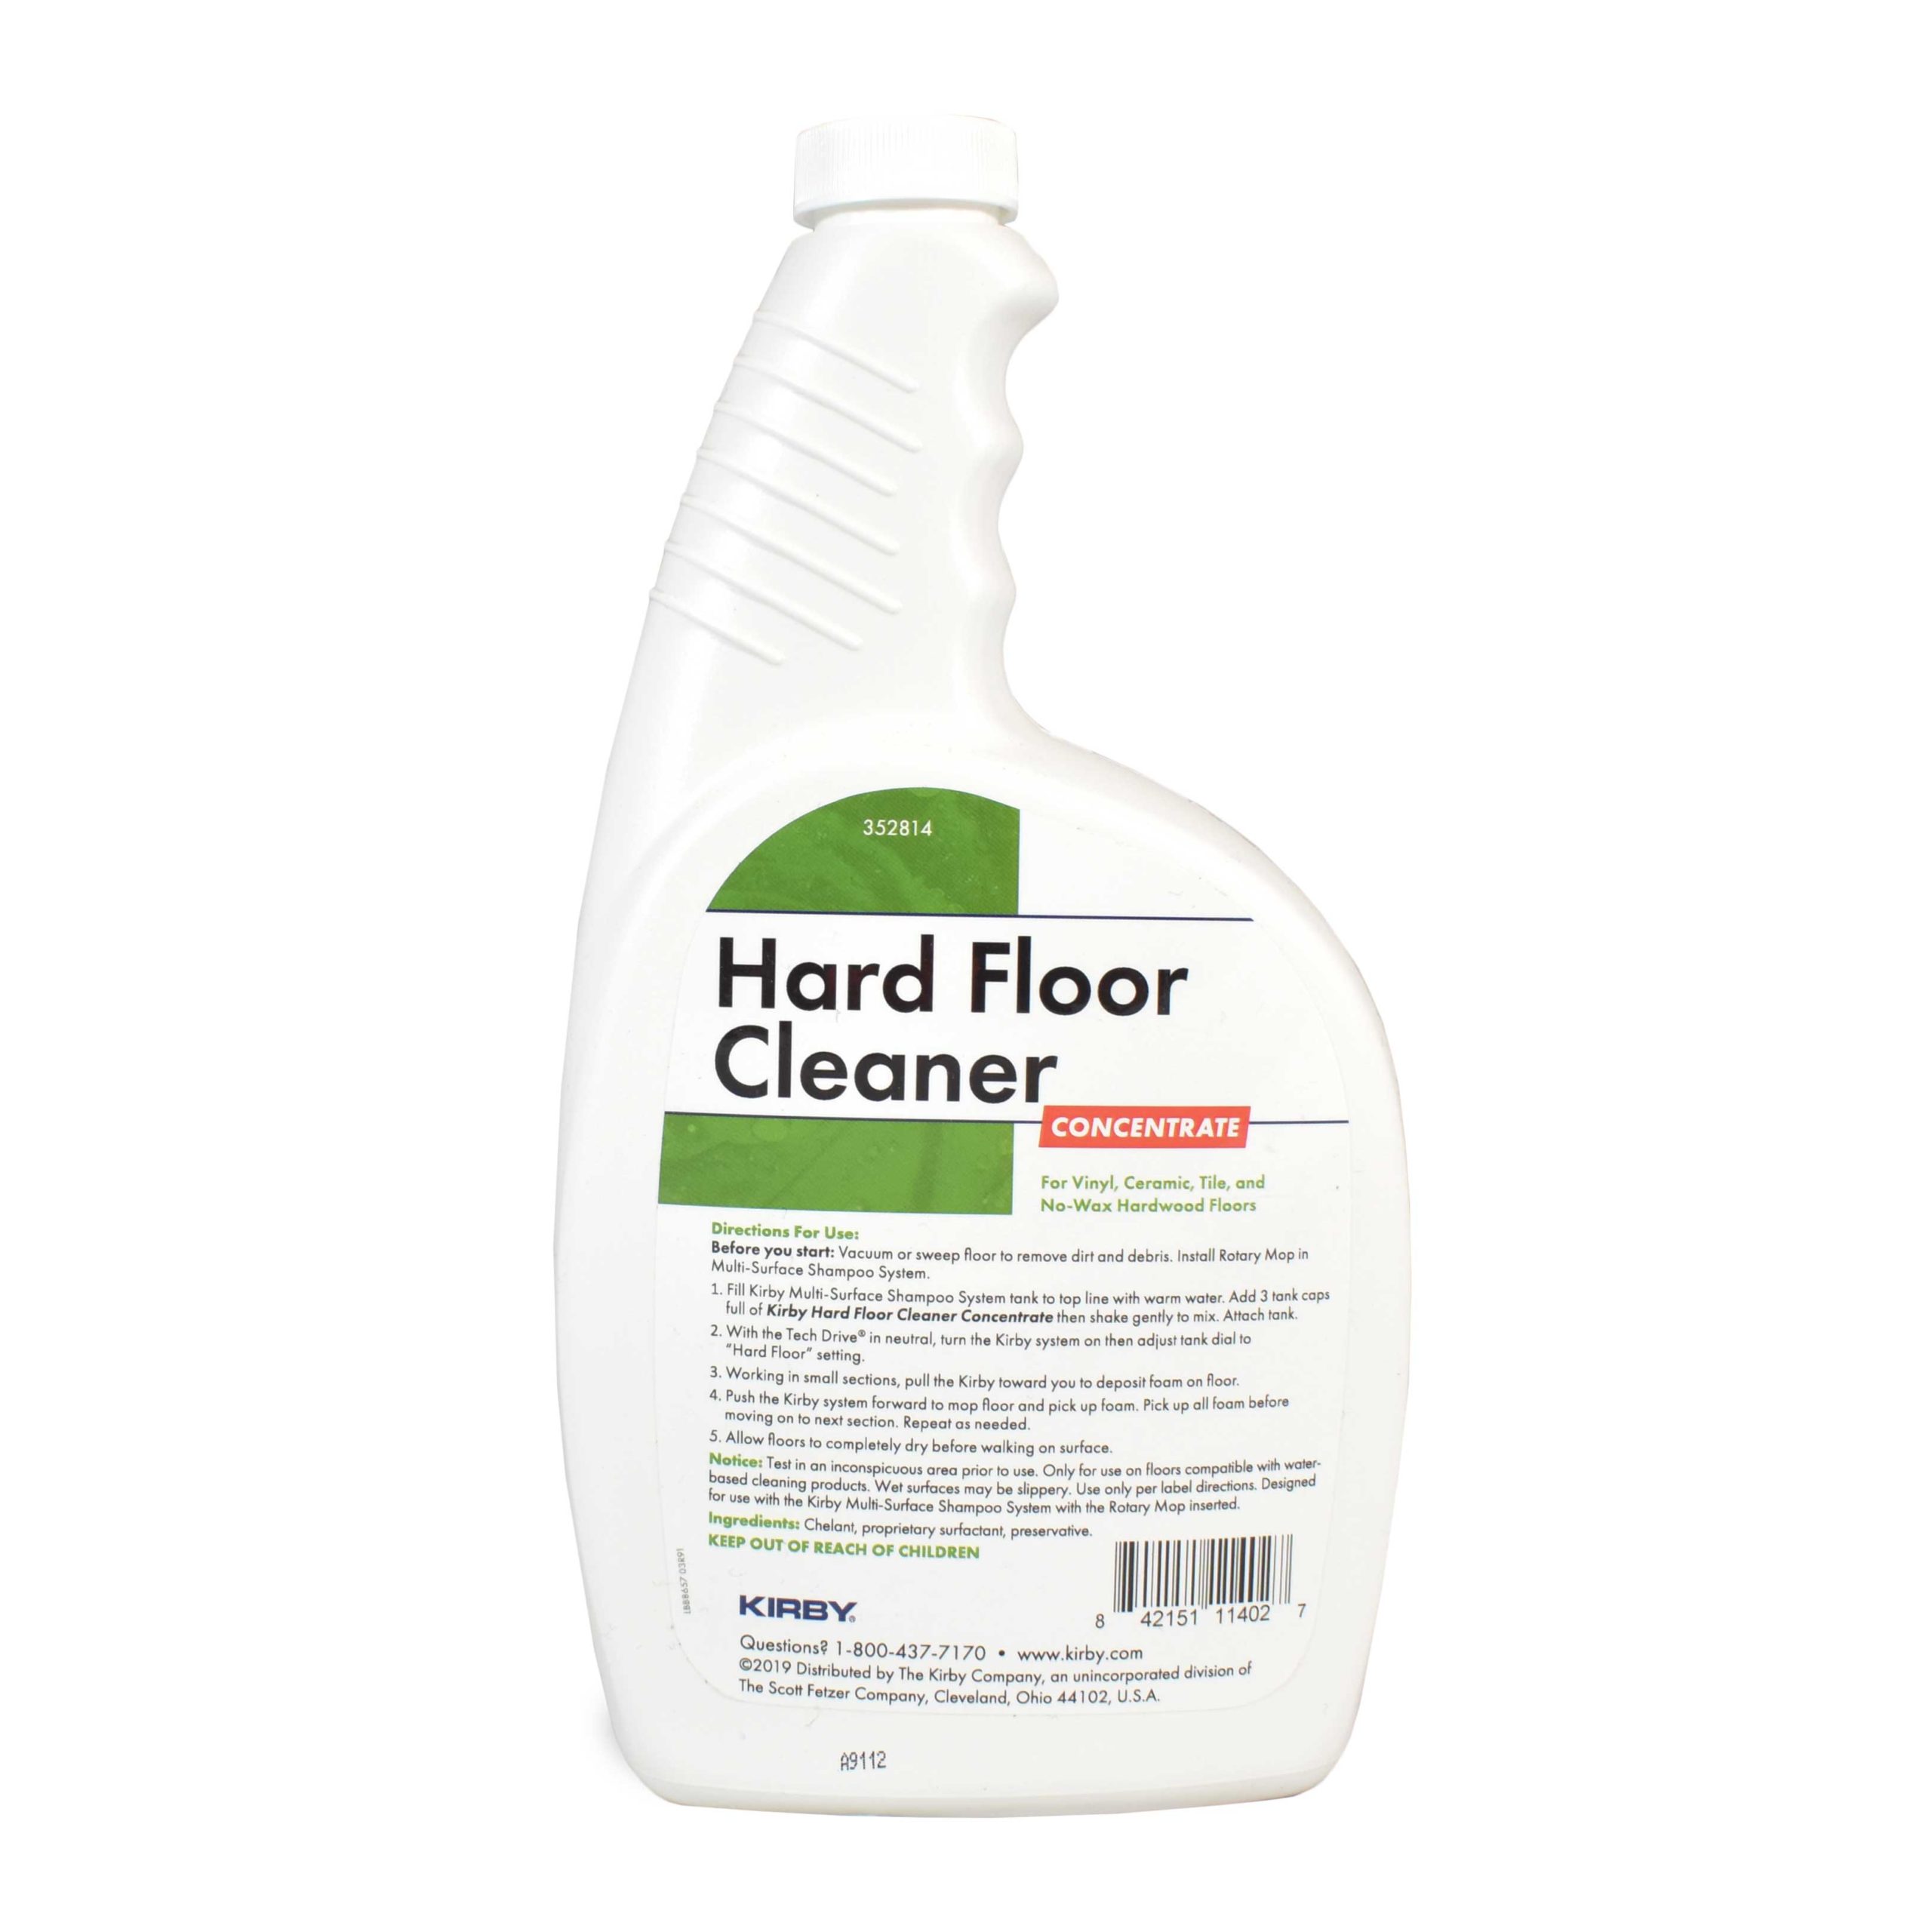 https://www.kirby.com/wp-content/uploads/2017/05/24oz_HardFloorCleaner_Concentrate-Back-1000x1000-1-scaled-1.jpeg